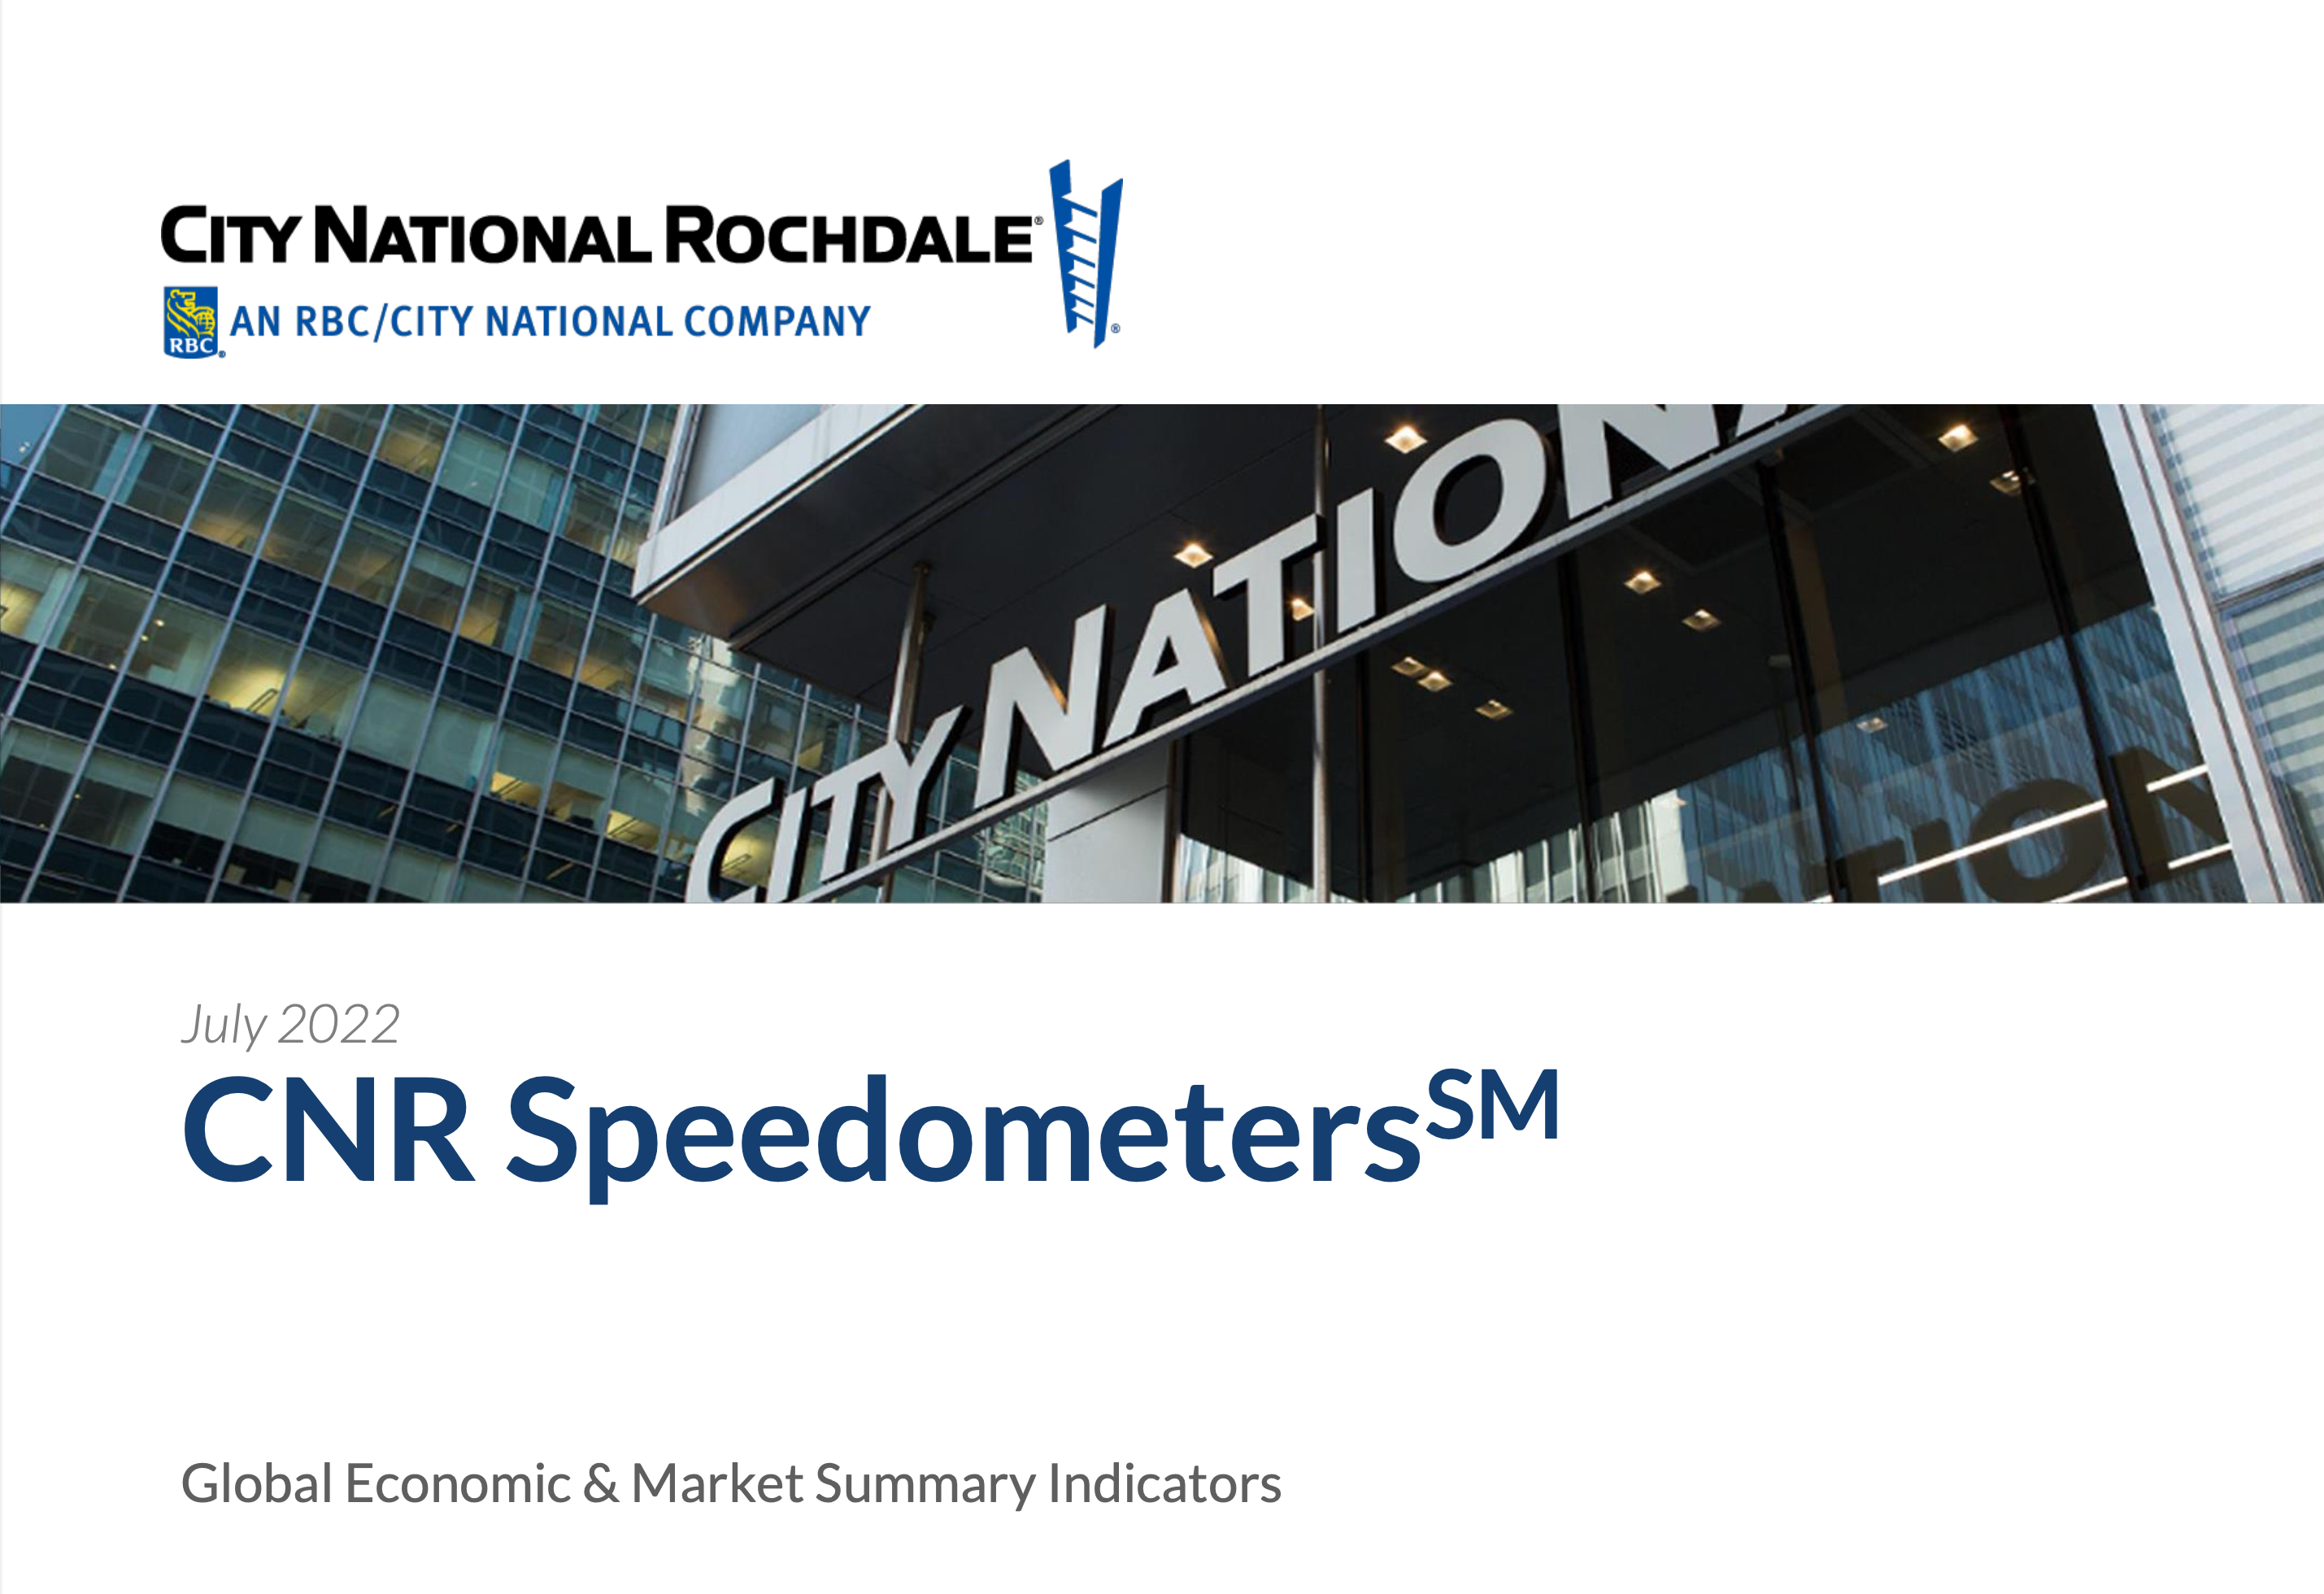 https://mgfs.net/wp-content/uploads/2022/07/city-national-rochdale-current-speedometers.pdf